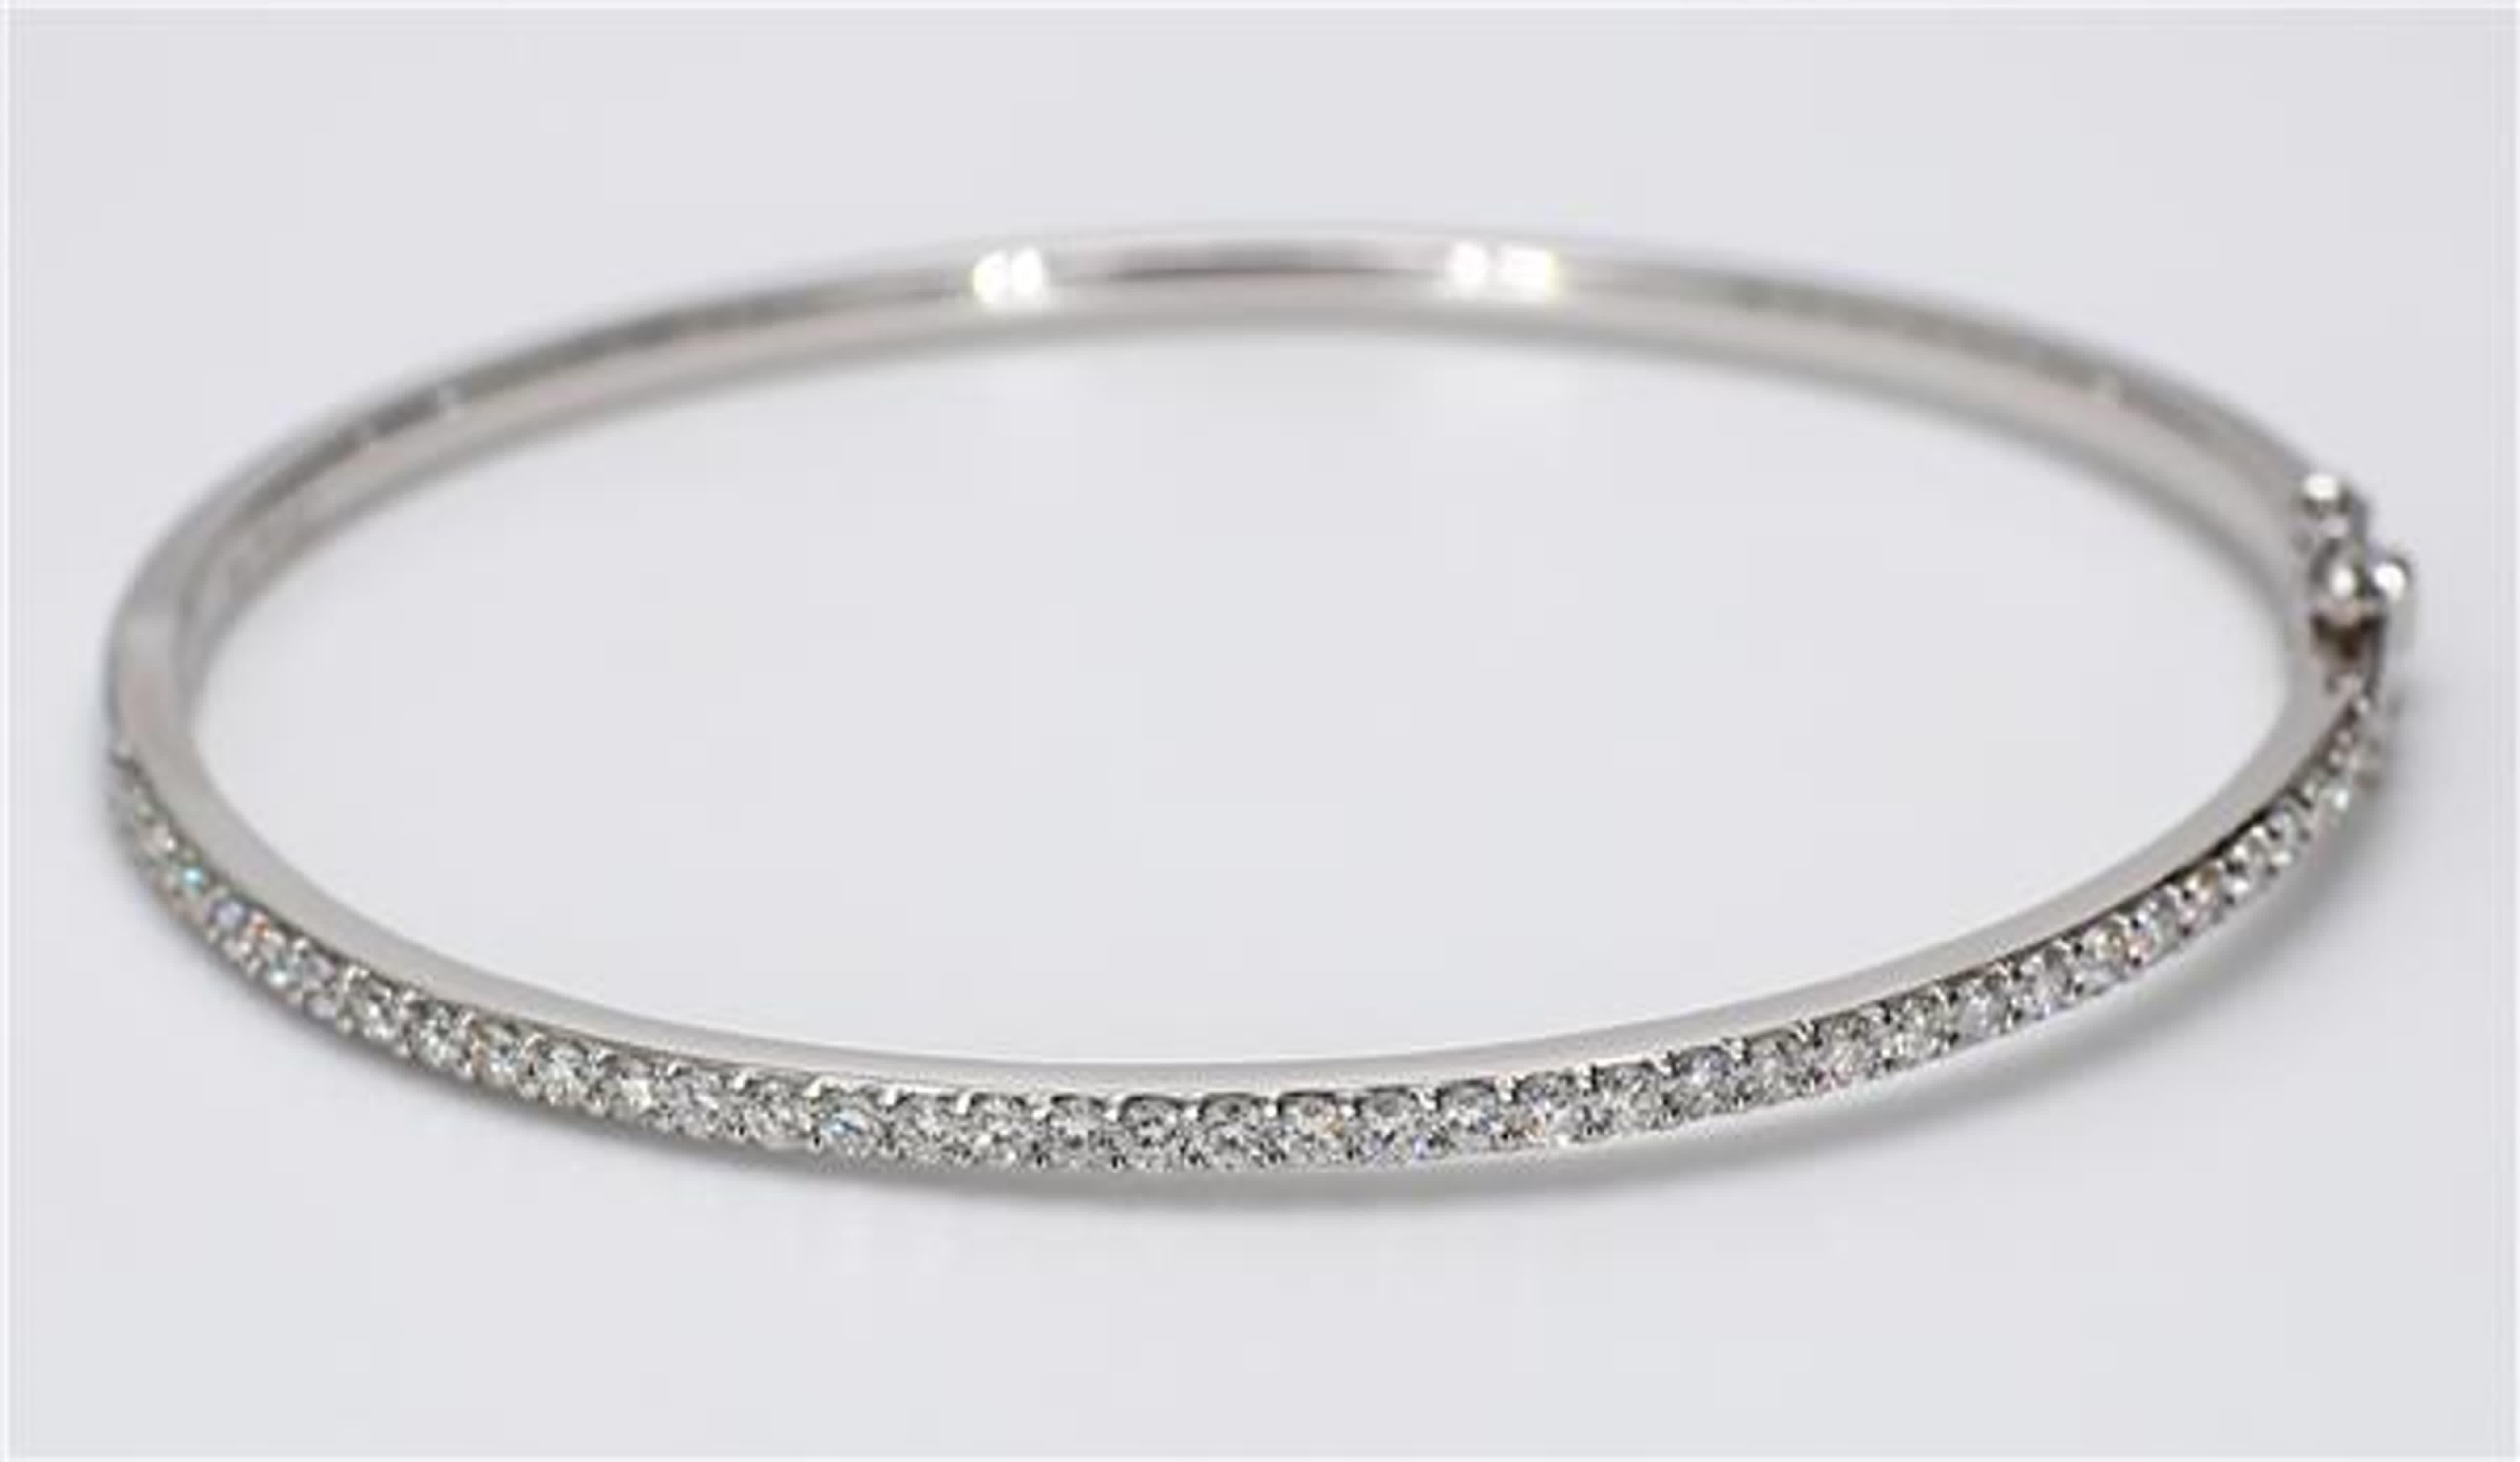 RareGemWorld's classic diamond bracelet. Mounted in a beautiful 18K White Gold setting with round natural white diamond melee. This bracelet is guaranteed to impress and enhance your personal collection.

Total Weight: 1.06cts

Diamond Measurements: